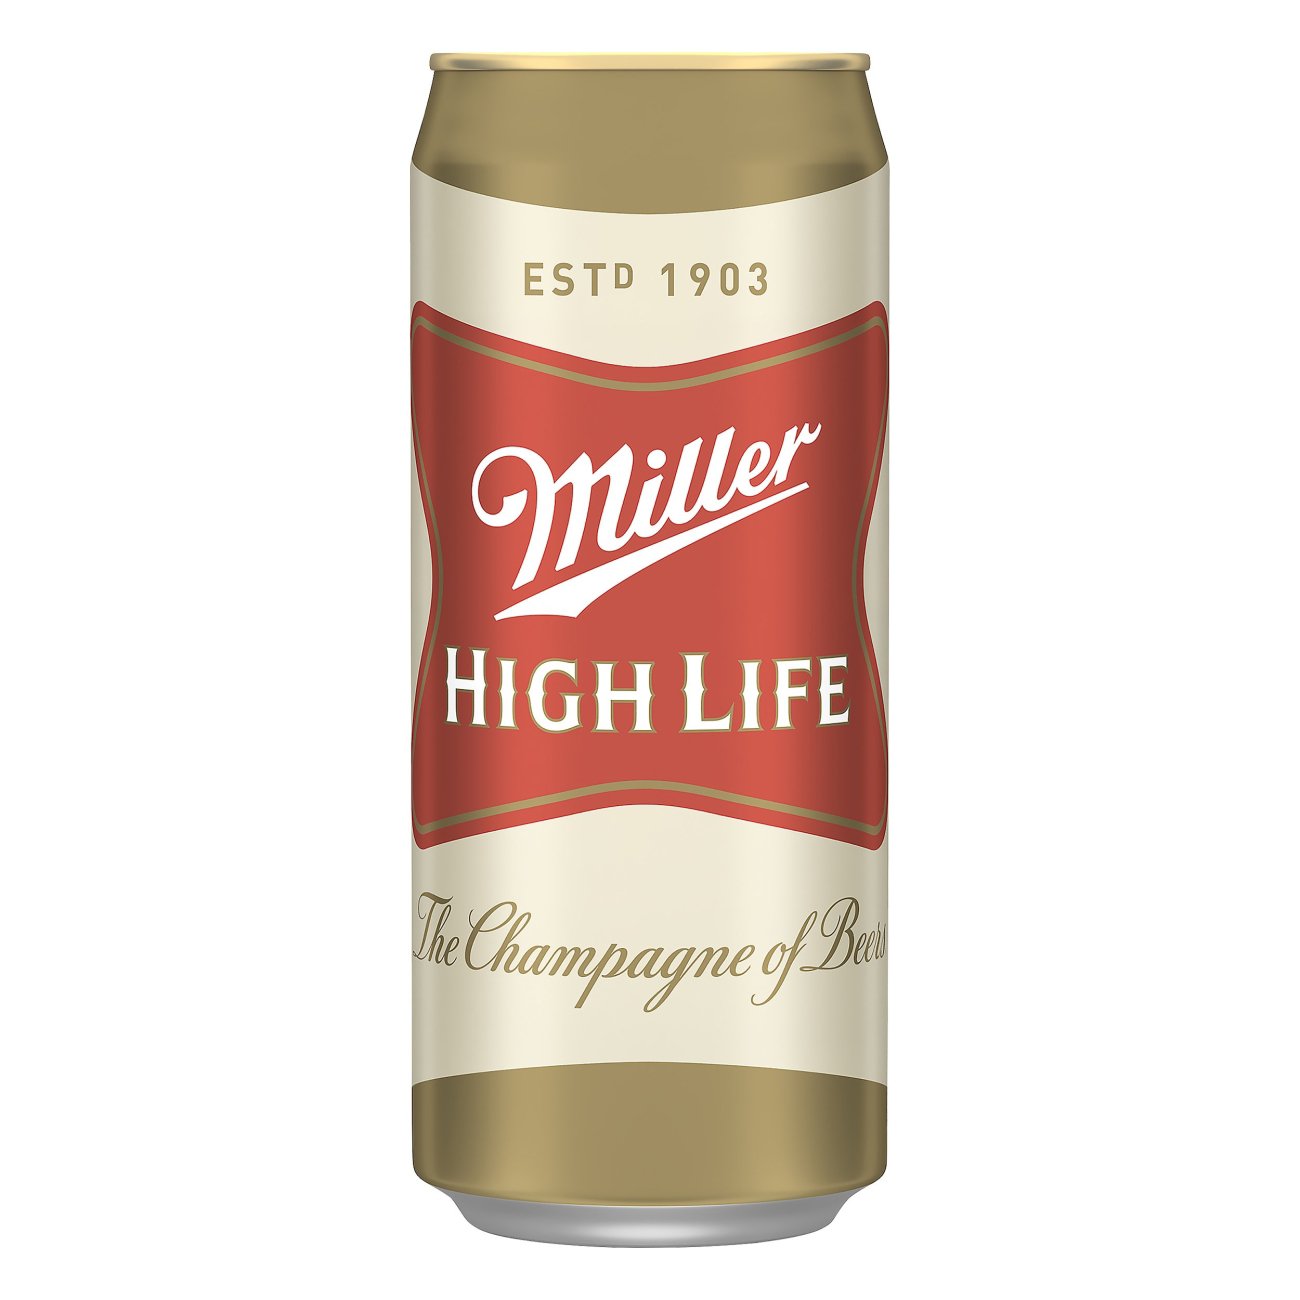 Miller High Life Beer Can